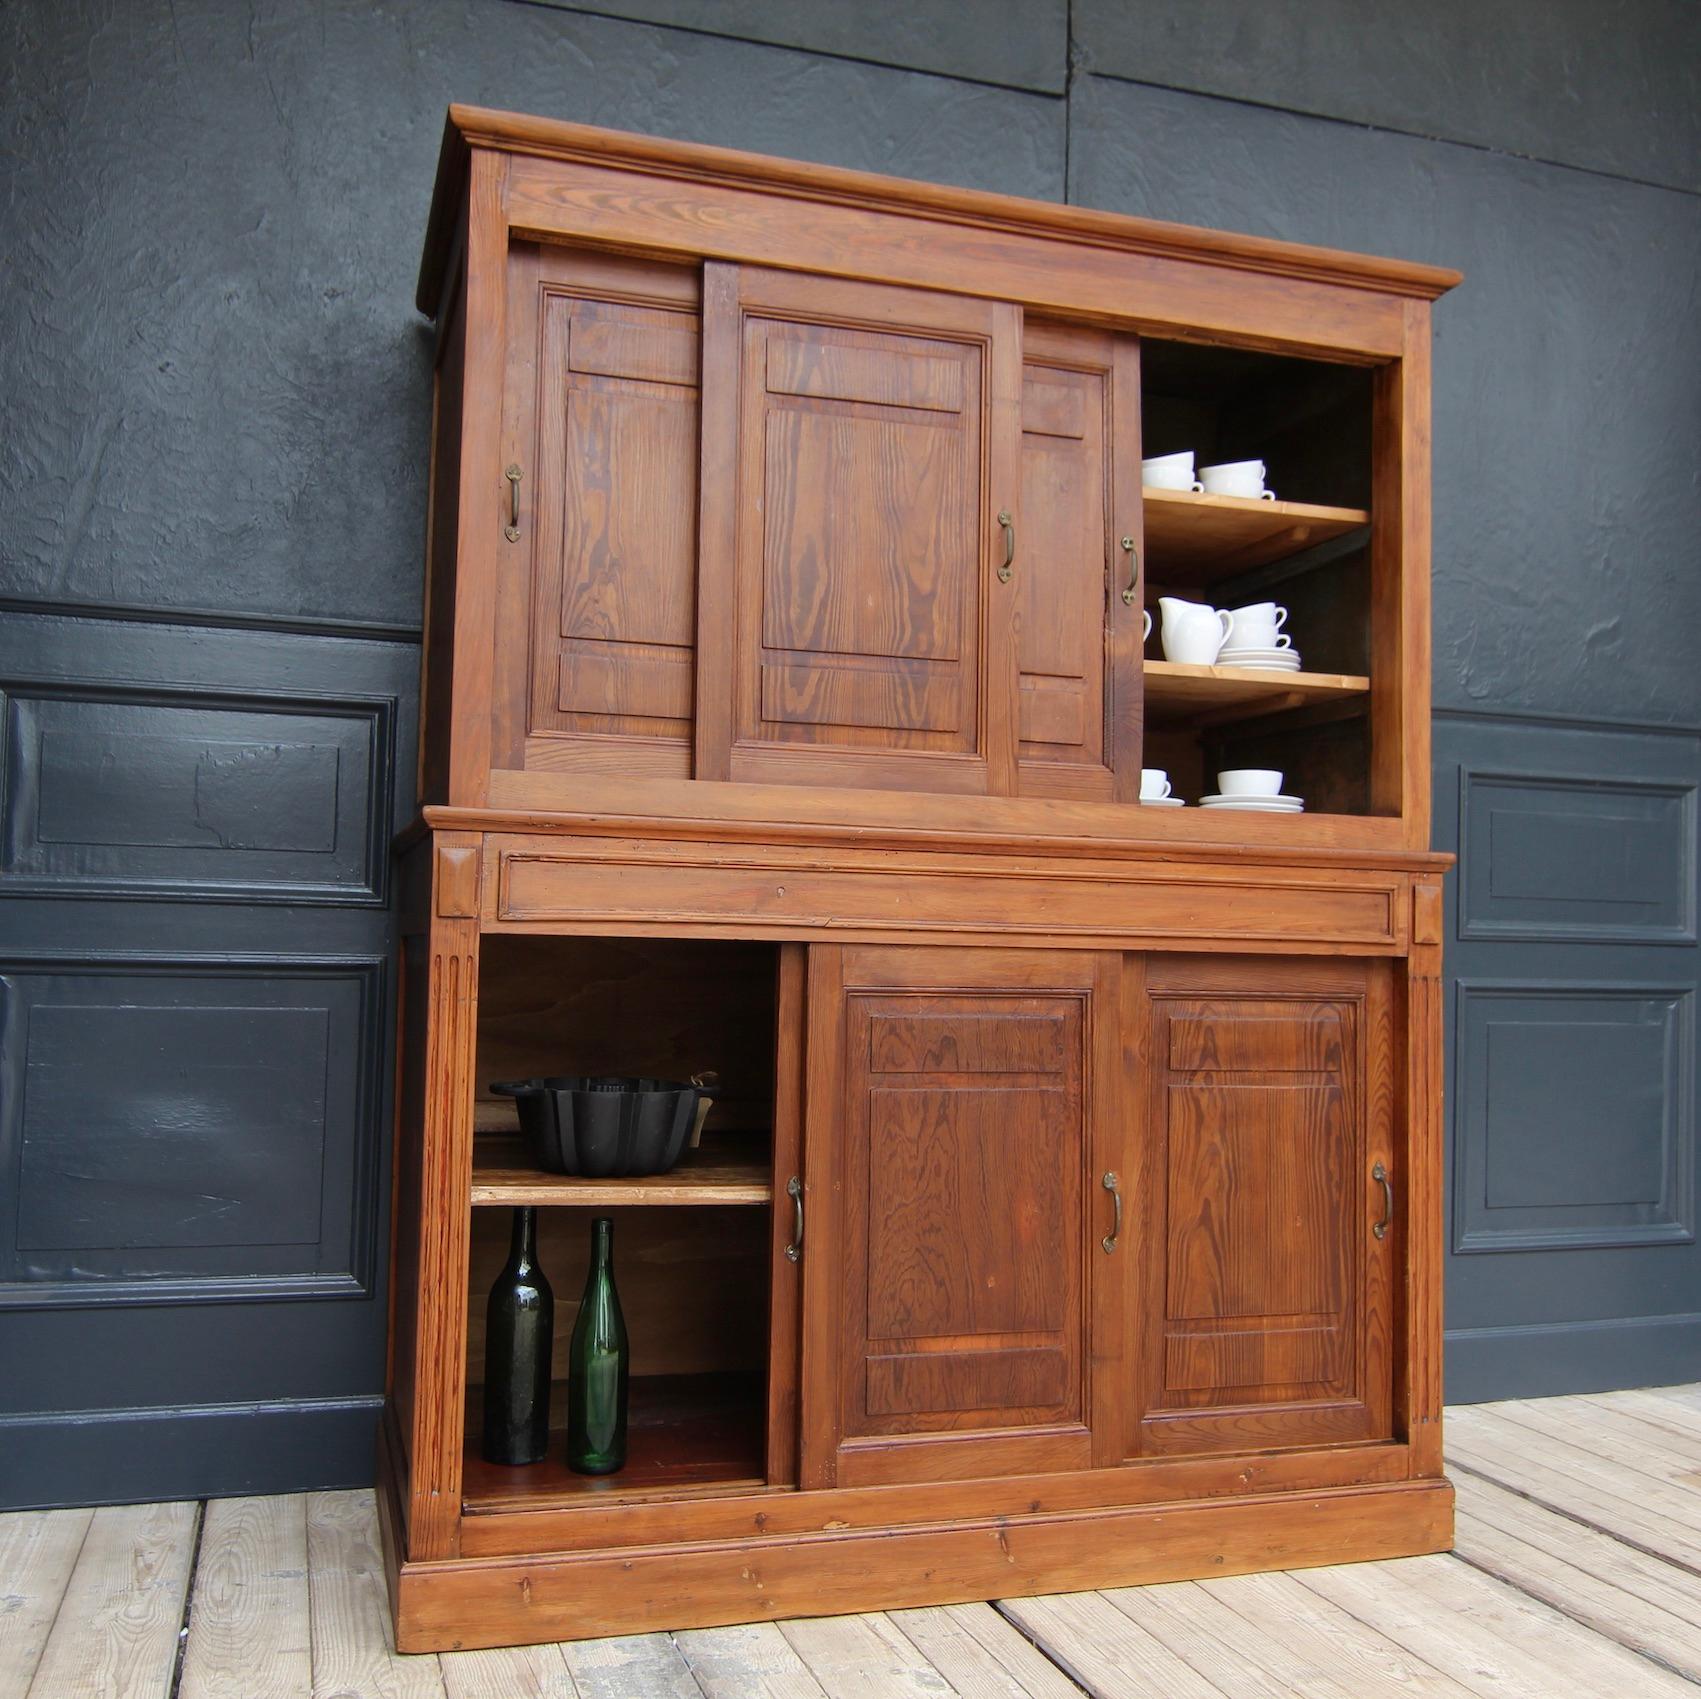 European Early 20th Century Pitch Pine Cabinet with Sliding Doors